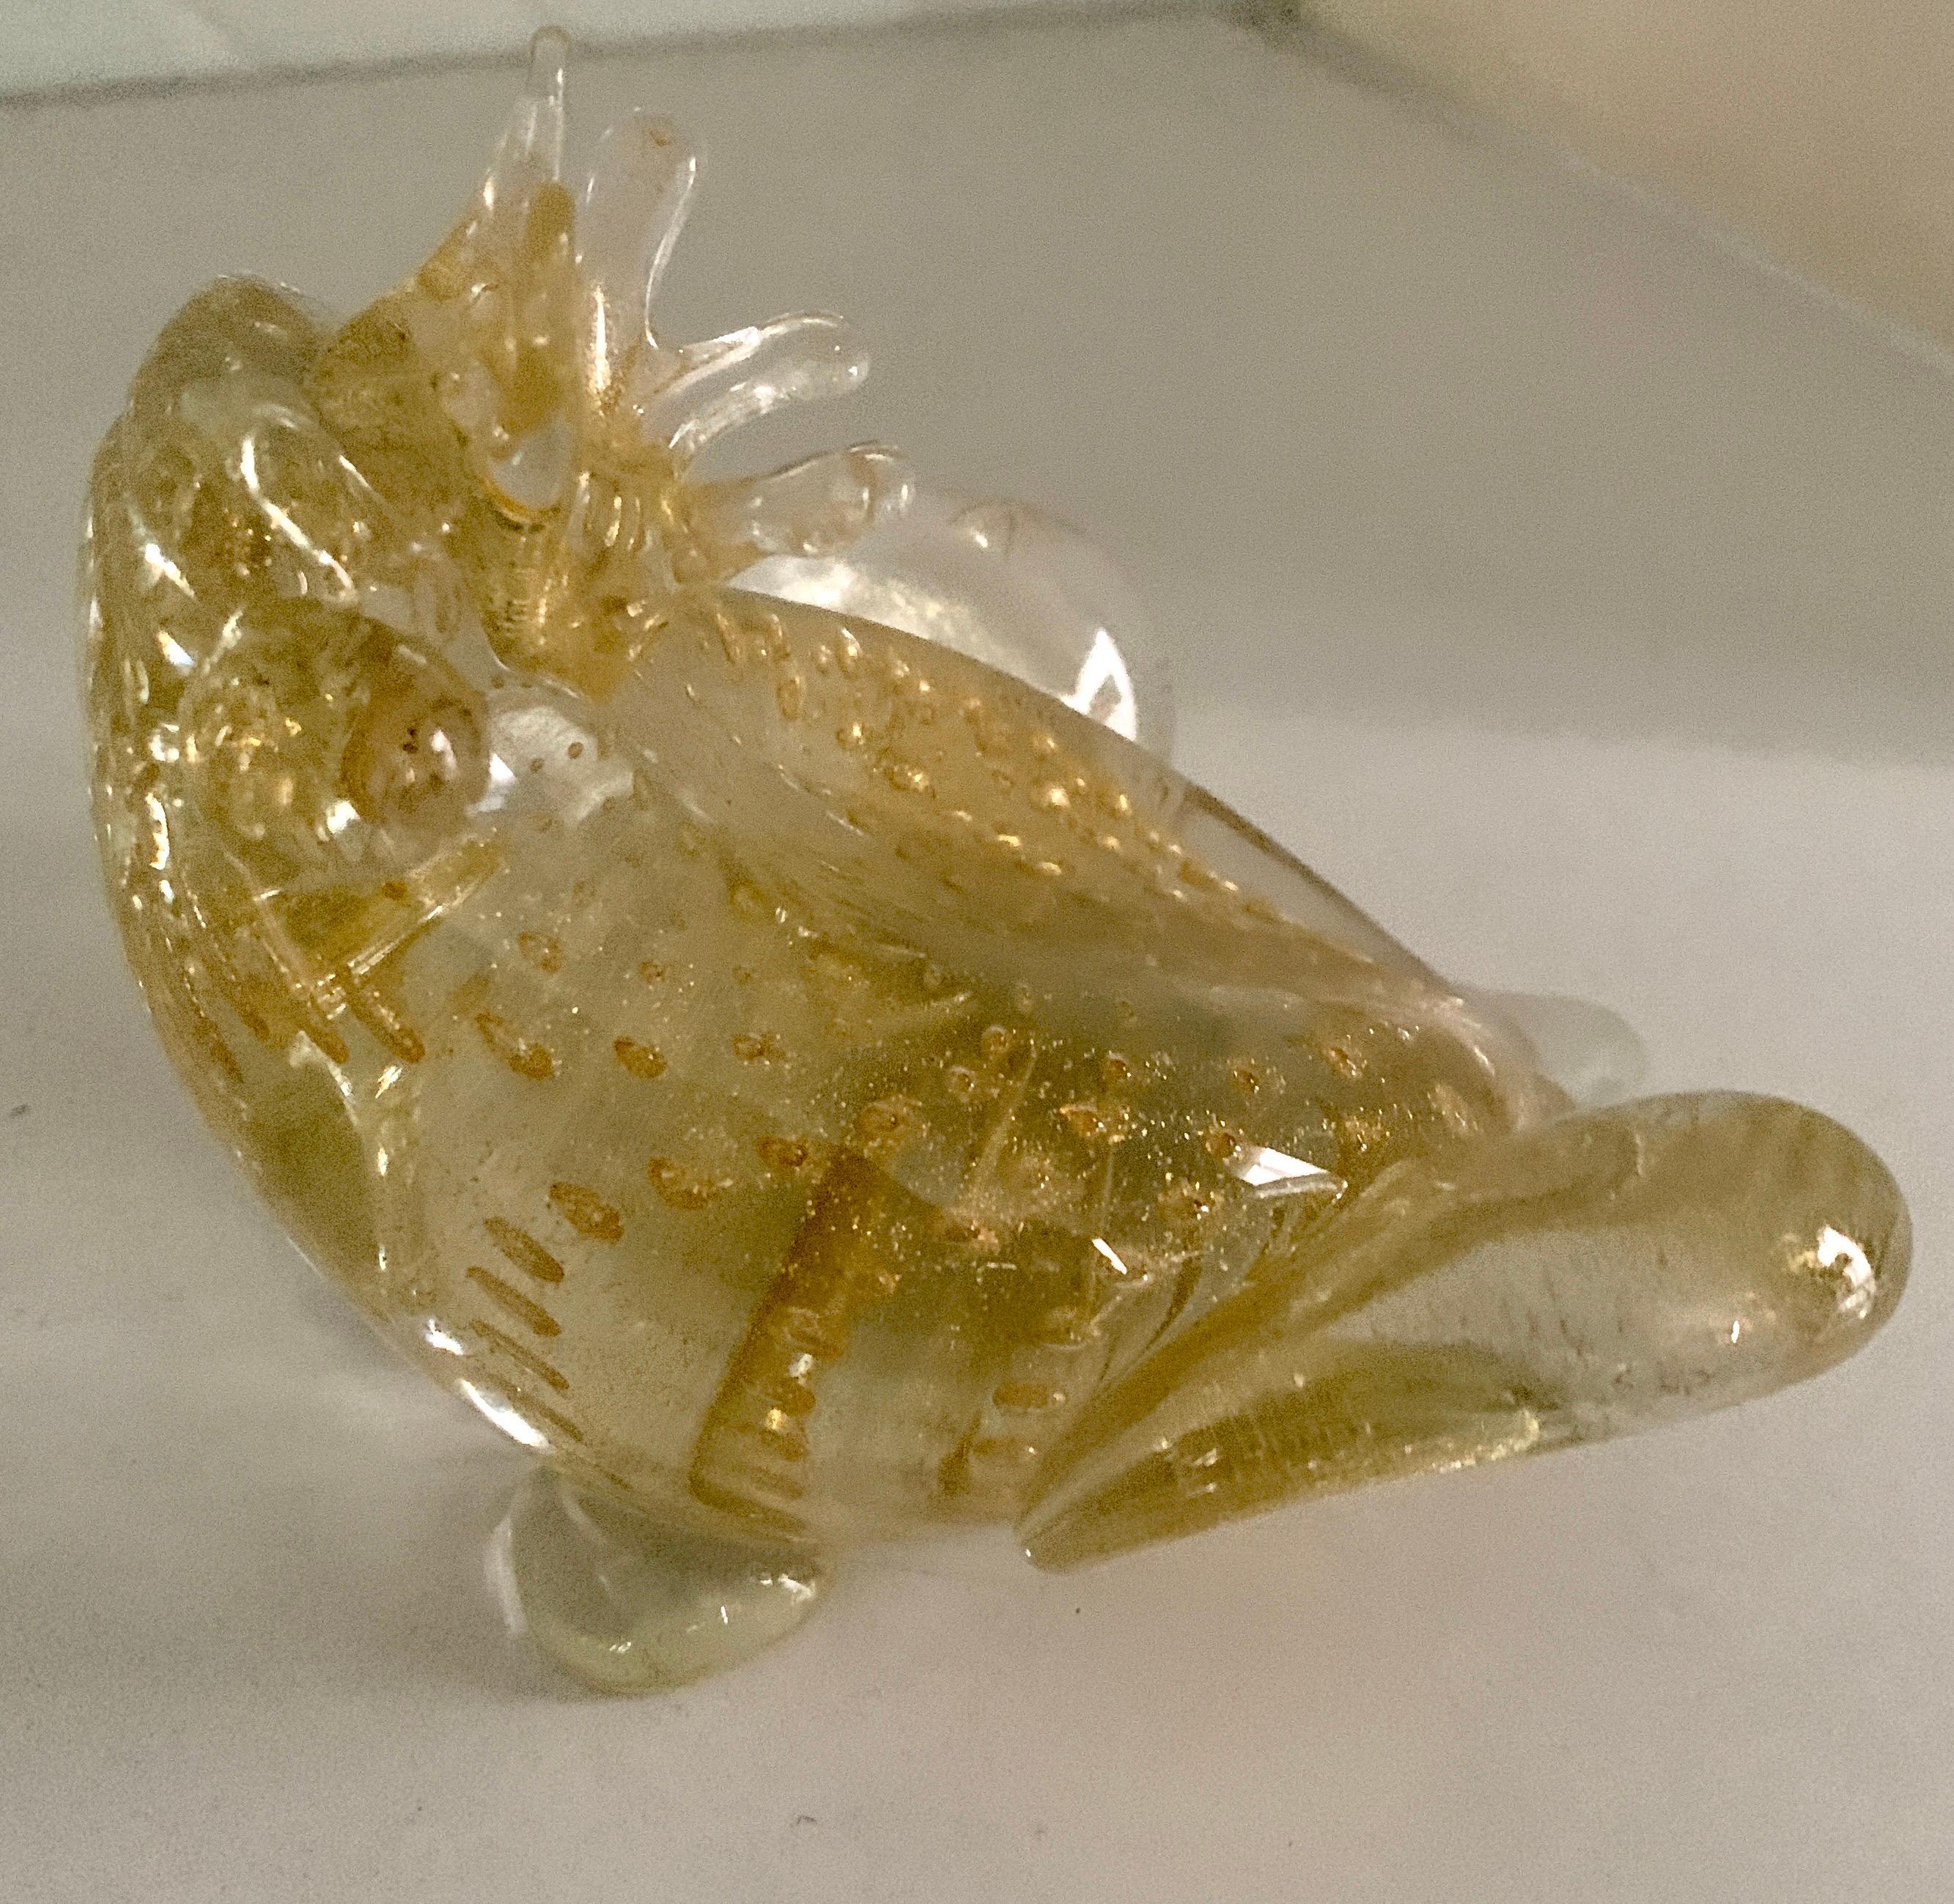 A delightful hand made Murano Glass Frog wearing a crown. Kissing this frog may not reveal a handsome prince, but it will make your cocktail table, side table or desk more appealing... the piece has accents of authentic gold flecks inside making it